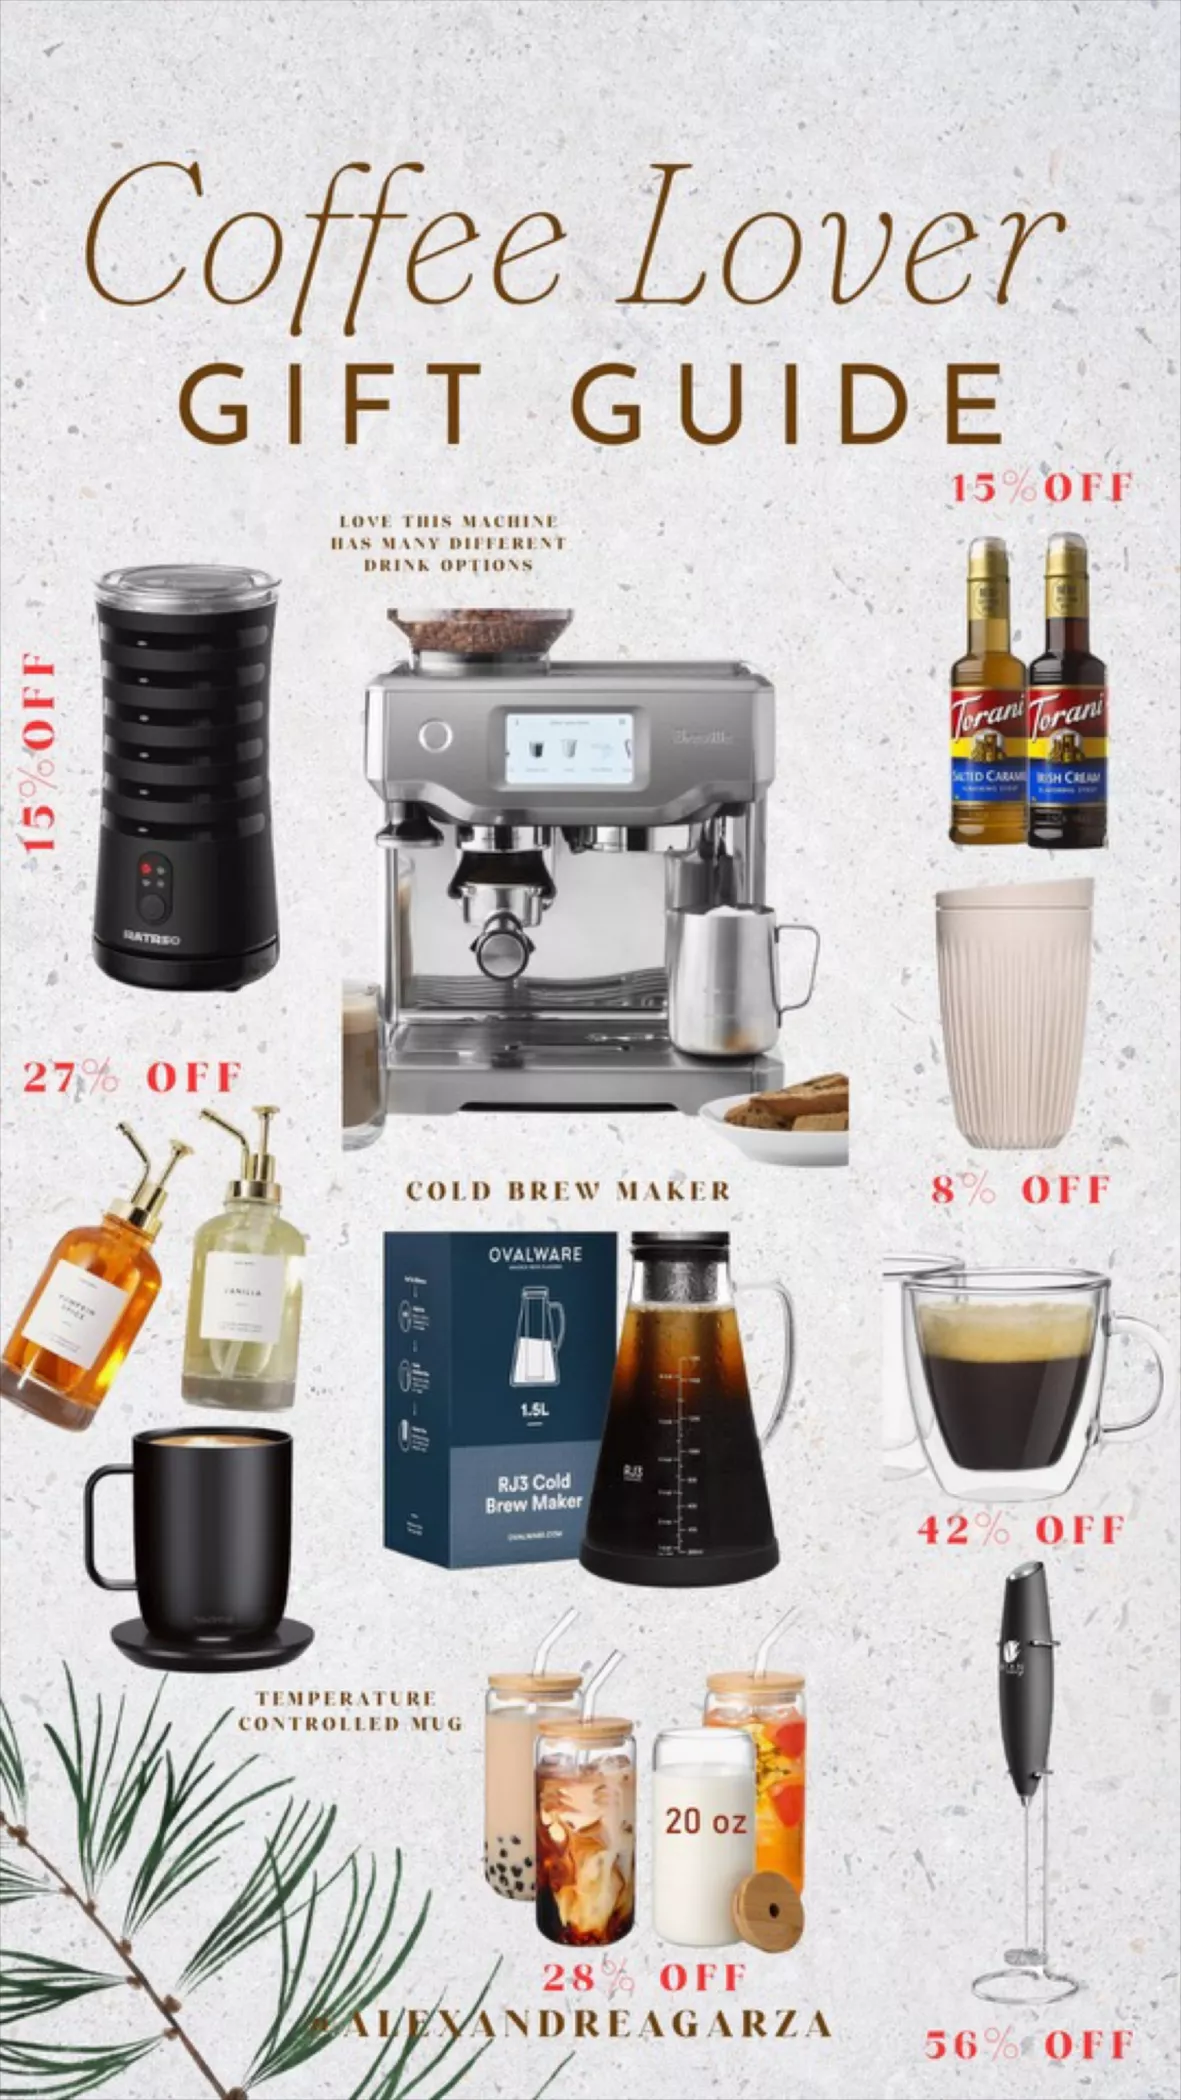 20 Gift Ideas for Coffee Lovers